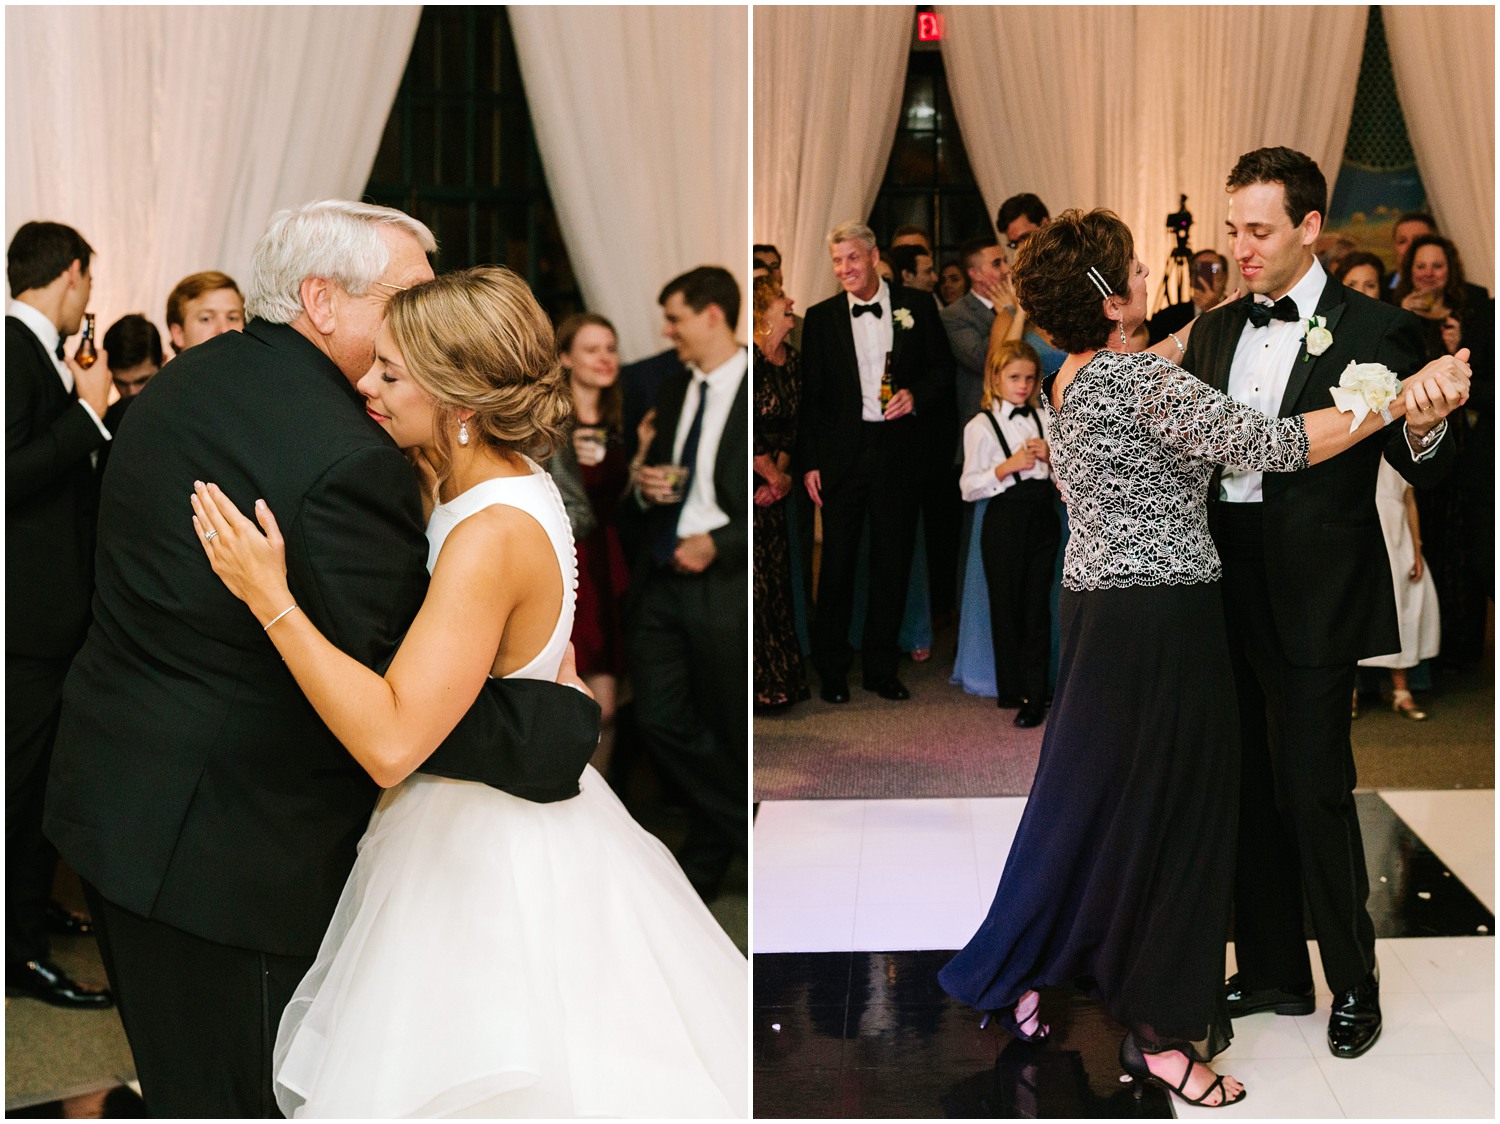 emotional bride hugs father during dance at wedding reception at Graylyn Estate